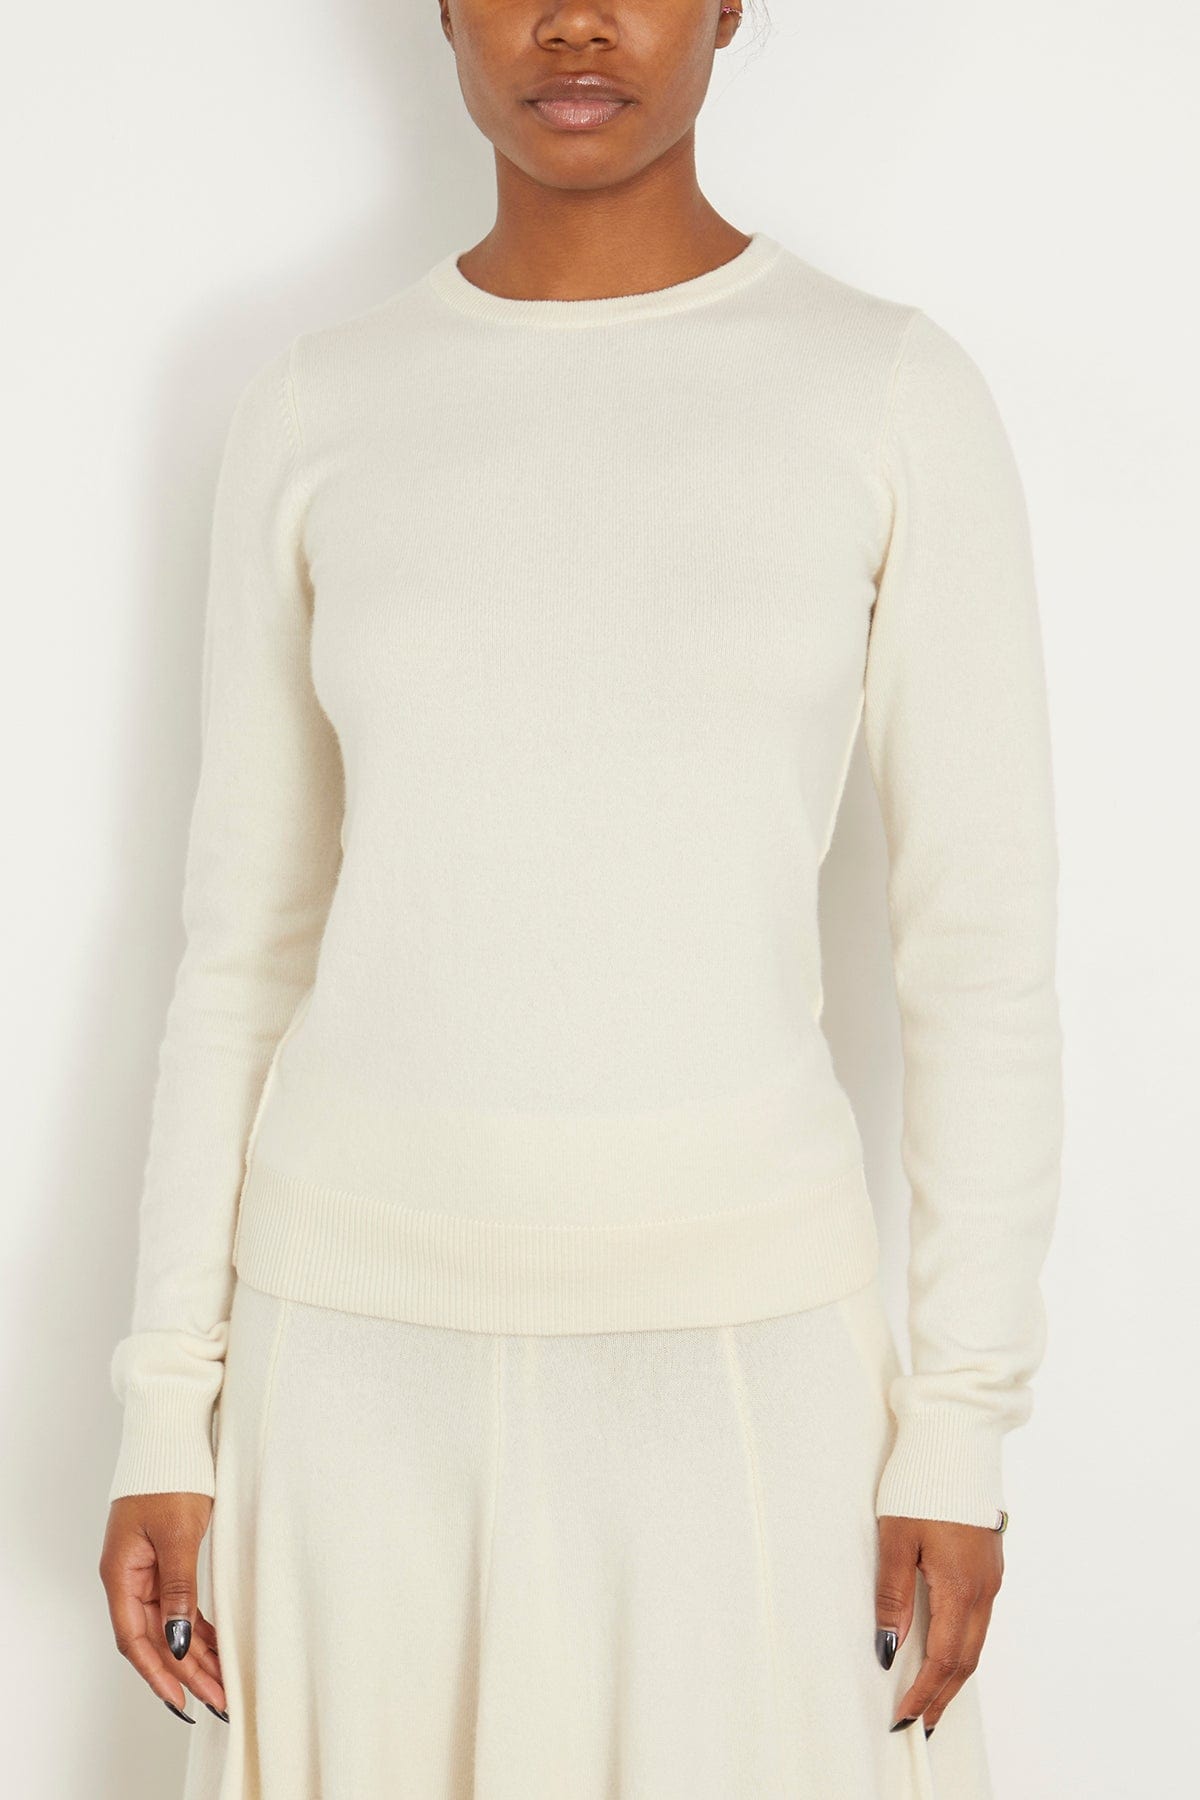 Extreme Cashmere Sweaters Body Sweater in Cream Extreme Cashmere Body Sweater in Cream